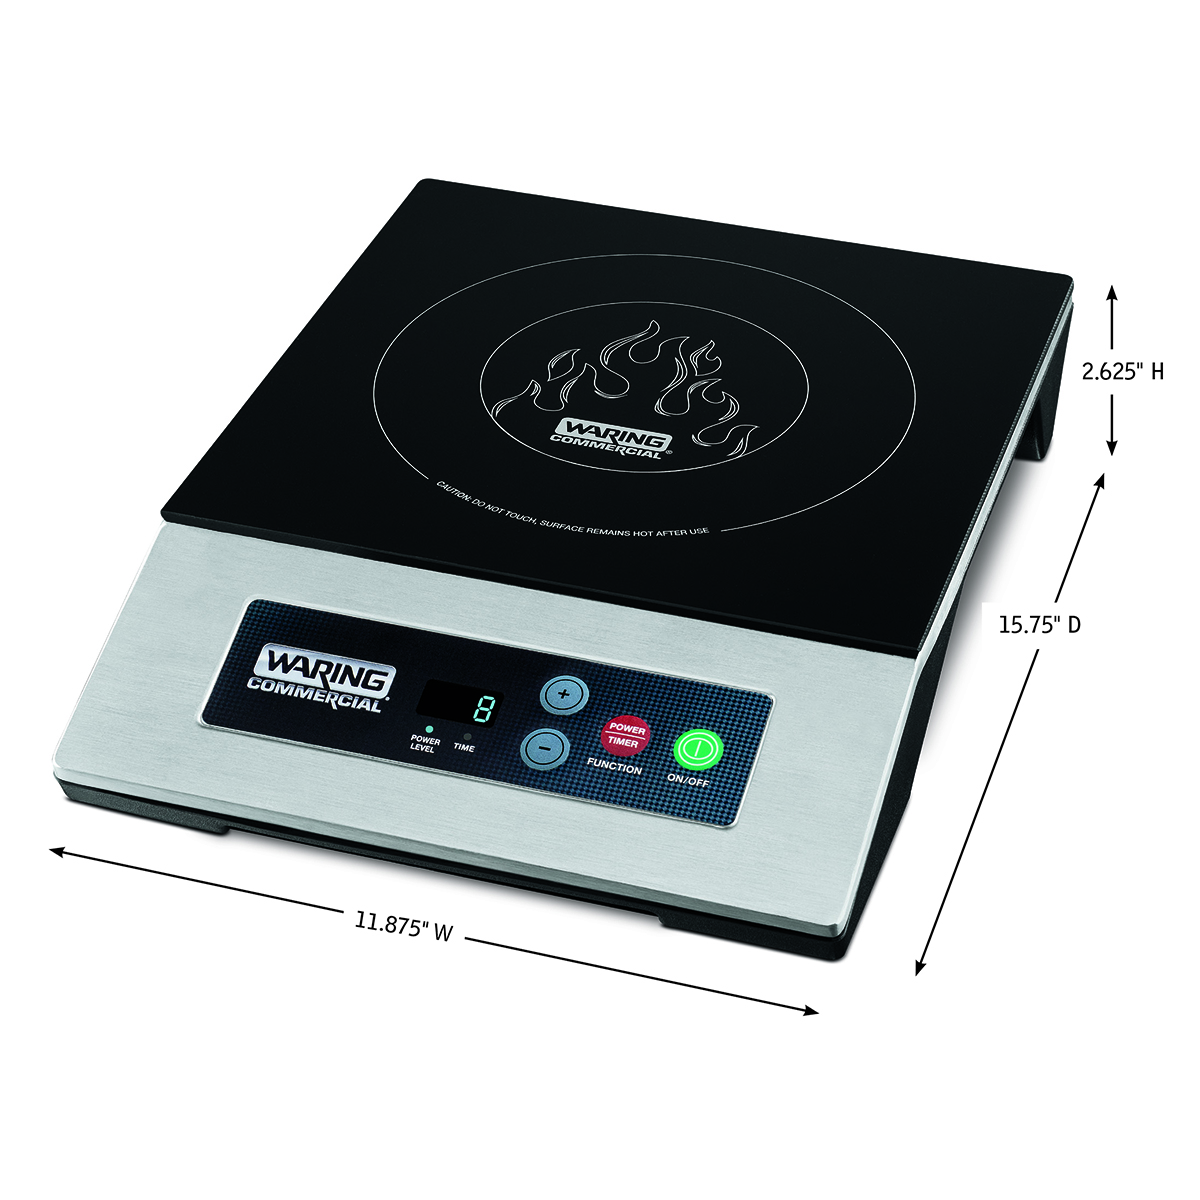 https://www.waringcommercialproducts.com/files/products/wih200-waring-commercial-single-induction-range-specs.jpg